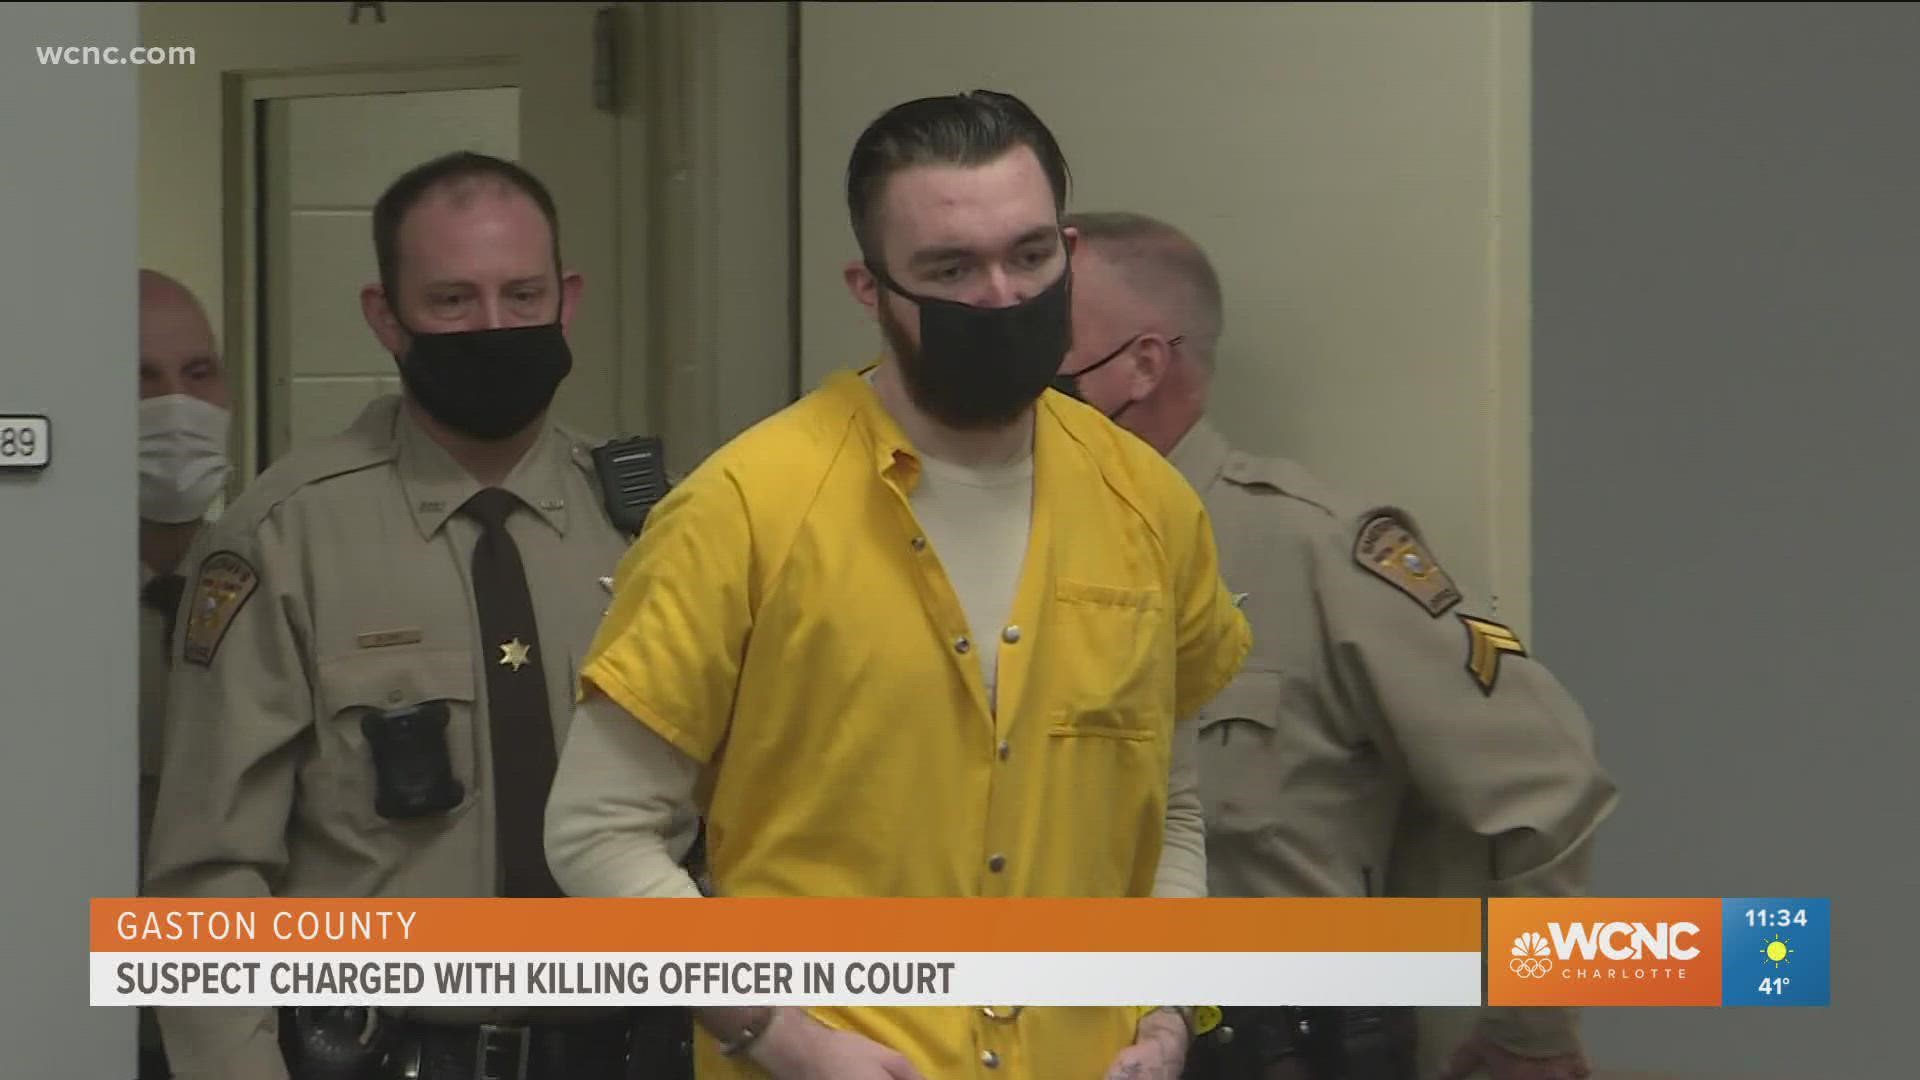 Joshua Funk pleaded not guilty to new charges in connection with the killing of Mount Holly Police Officer Tyler Herndon in December 2020.